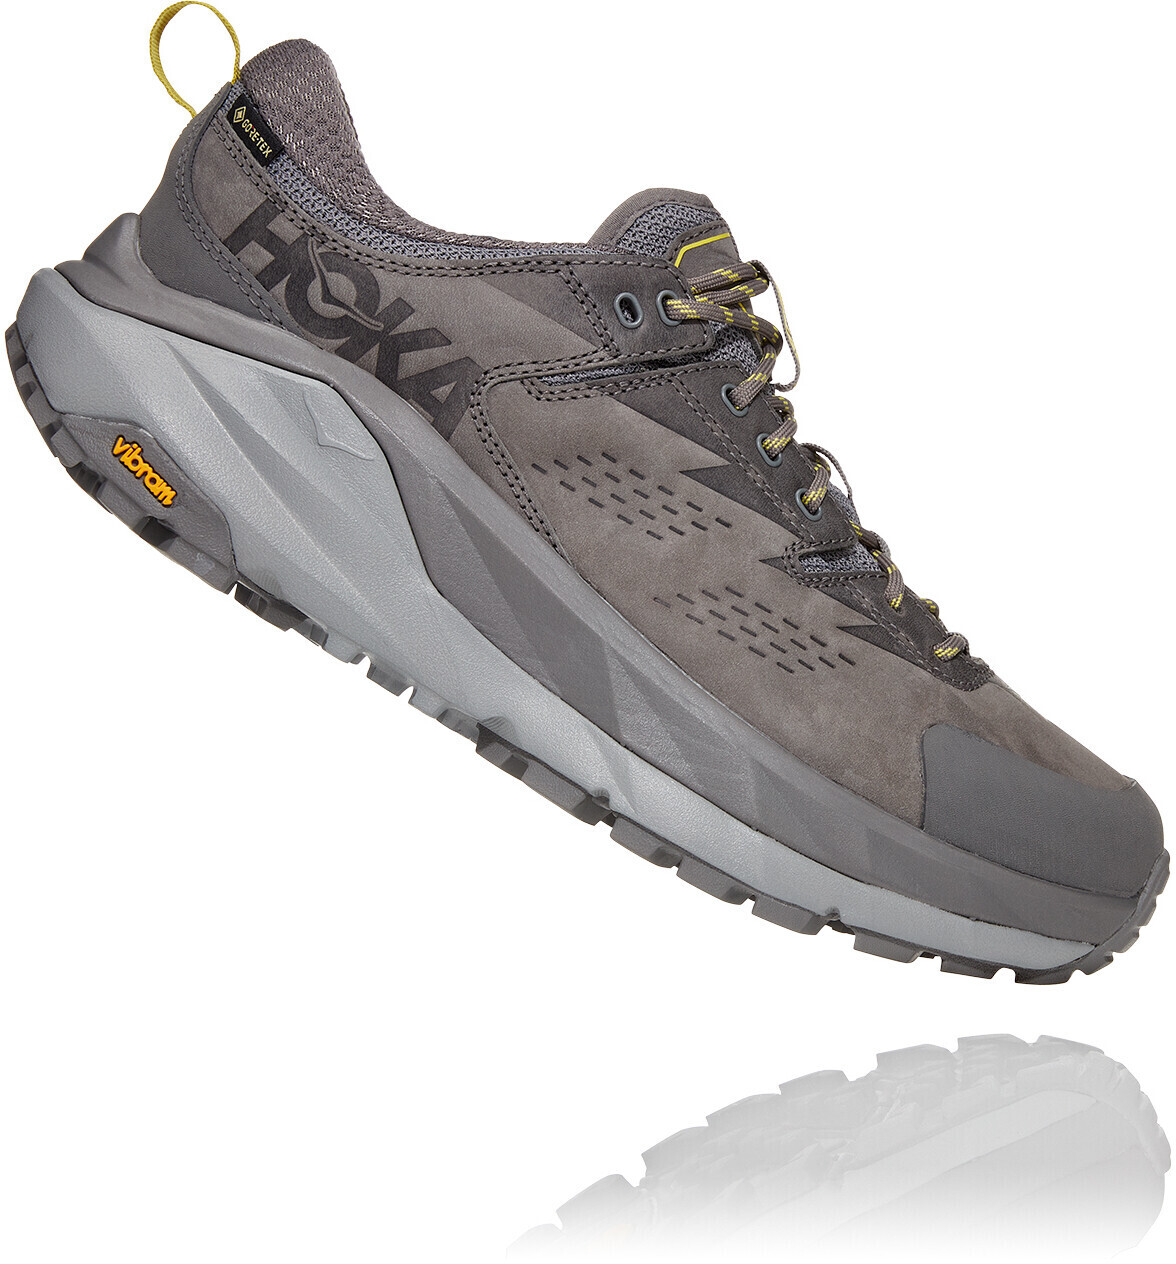 Buy Hoka One One Kaha Low grey from £130.00 (Today) – Best Deals on ...